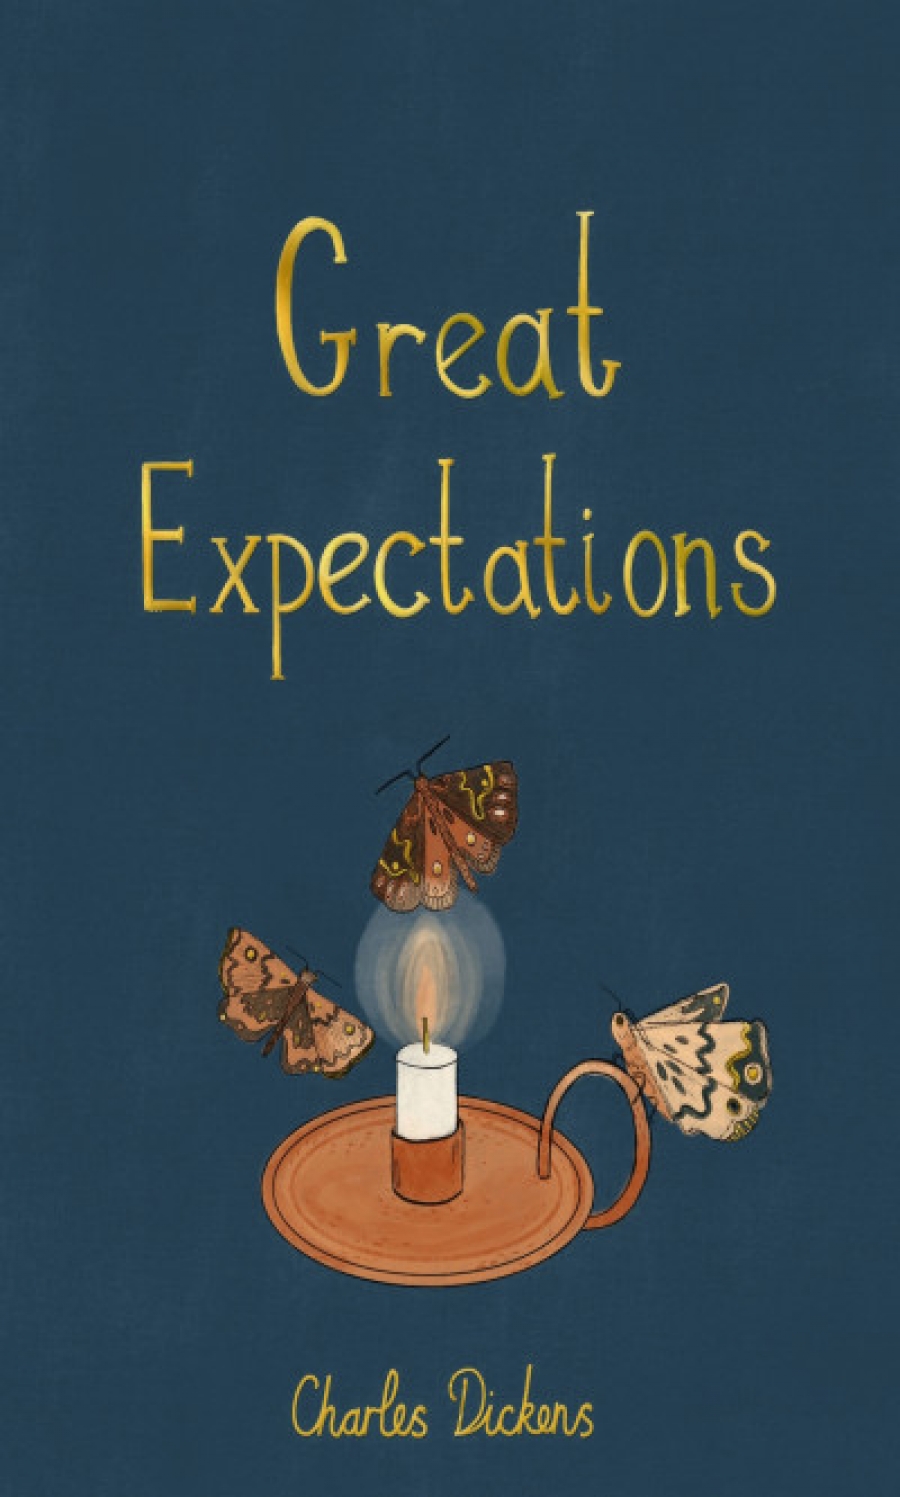 Dickens Charles Great expectations 